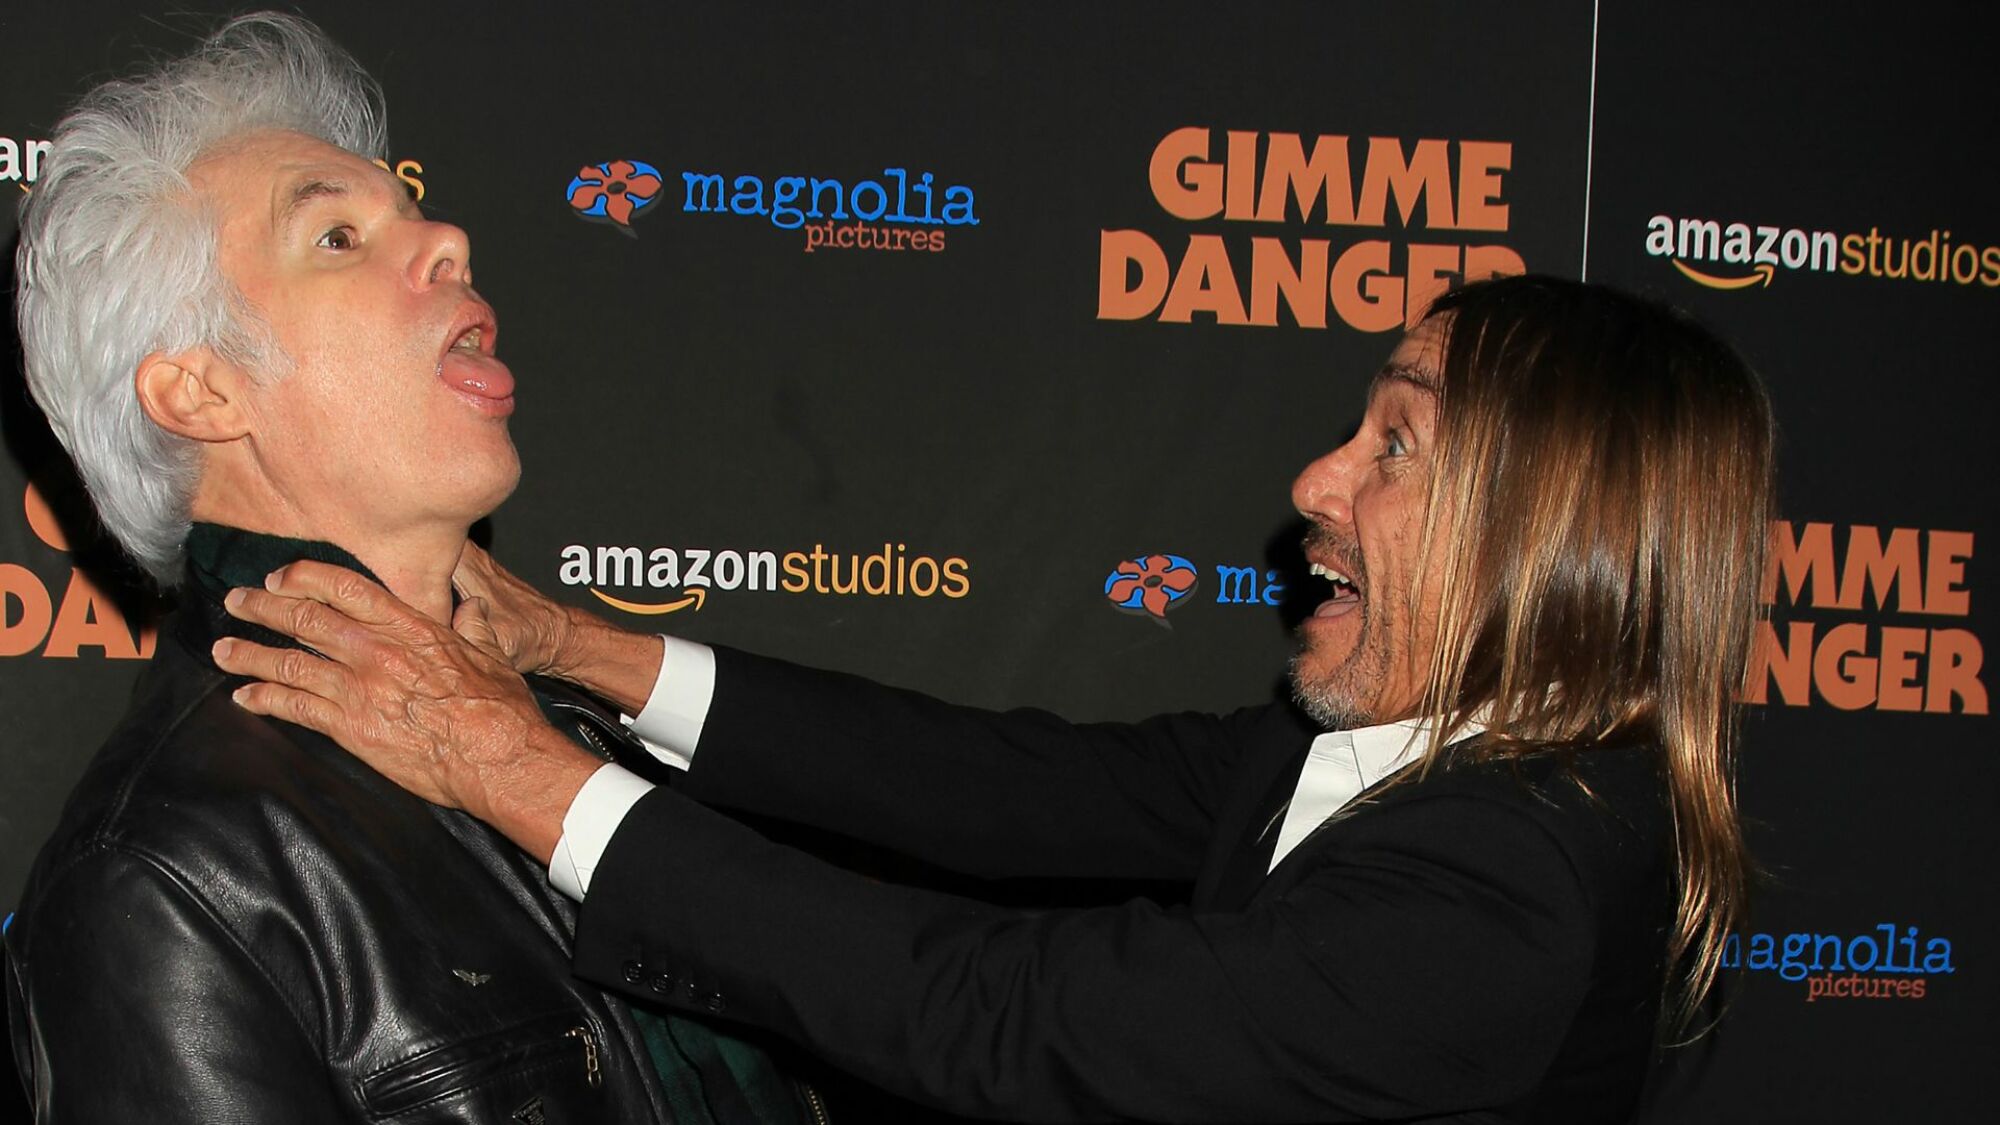 Jim Jarmusch and Iggy Pop goof around on the red carpet for "Gimme Danger."